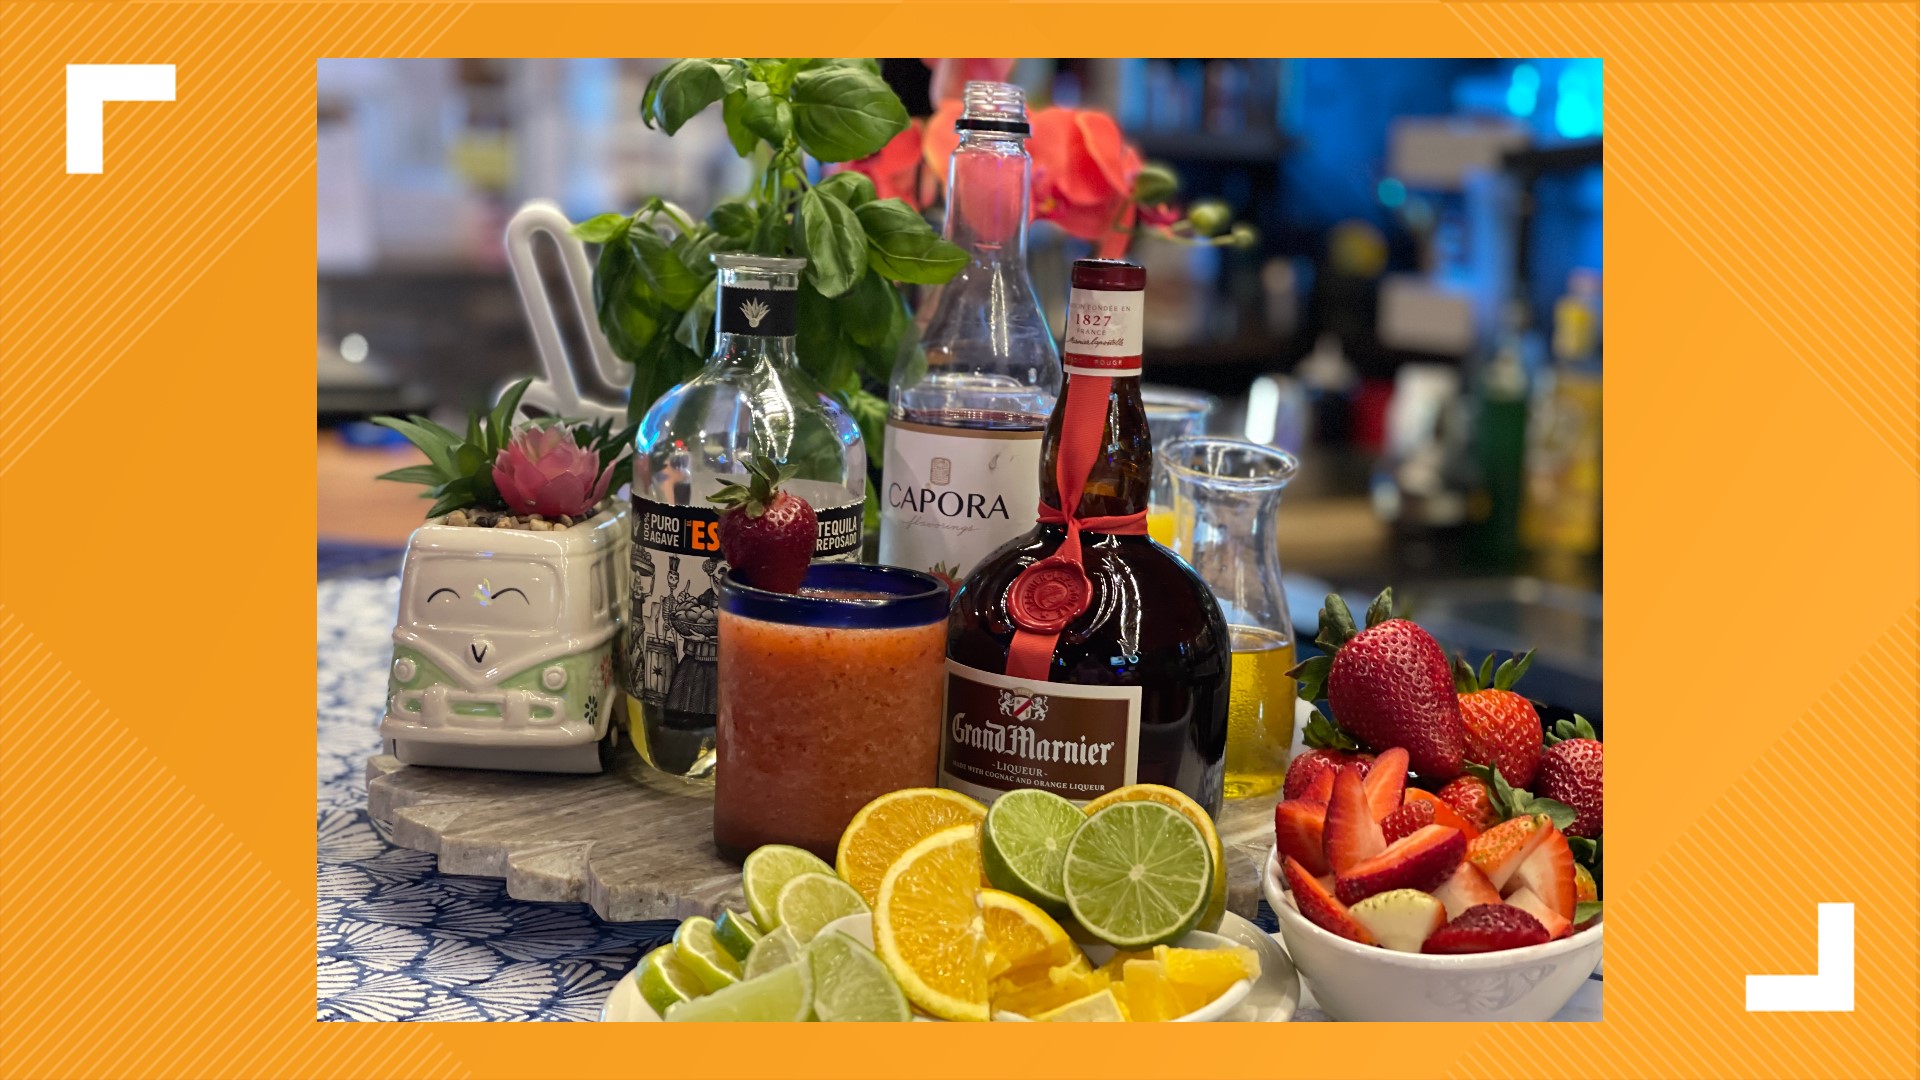 Cinco de Mayo is upon us, and the gang at Olivia's knows just the right meal to make.